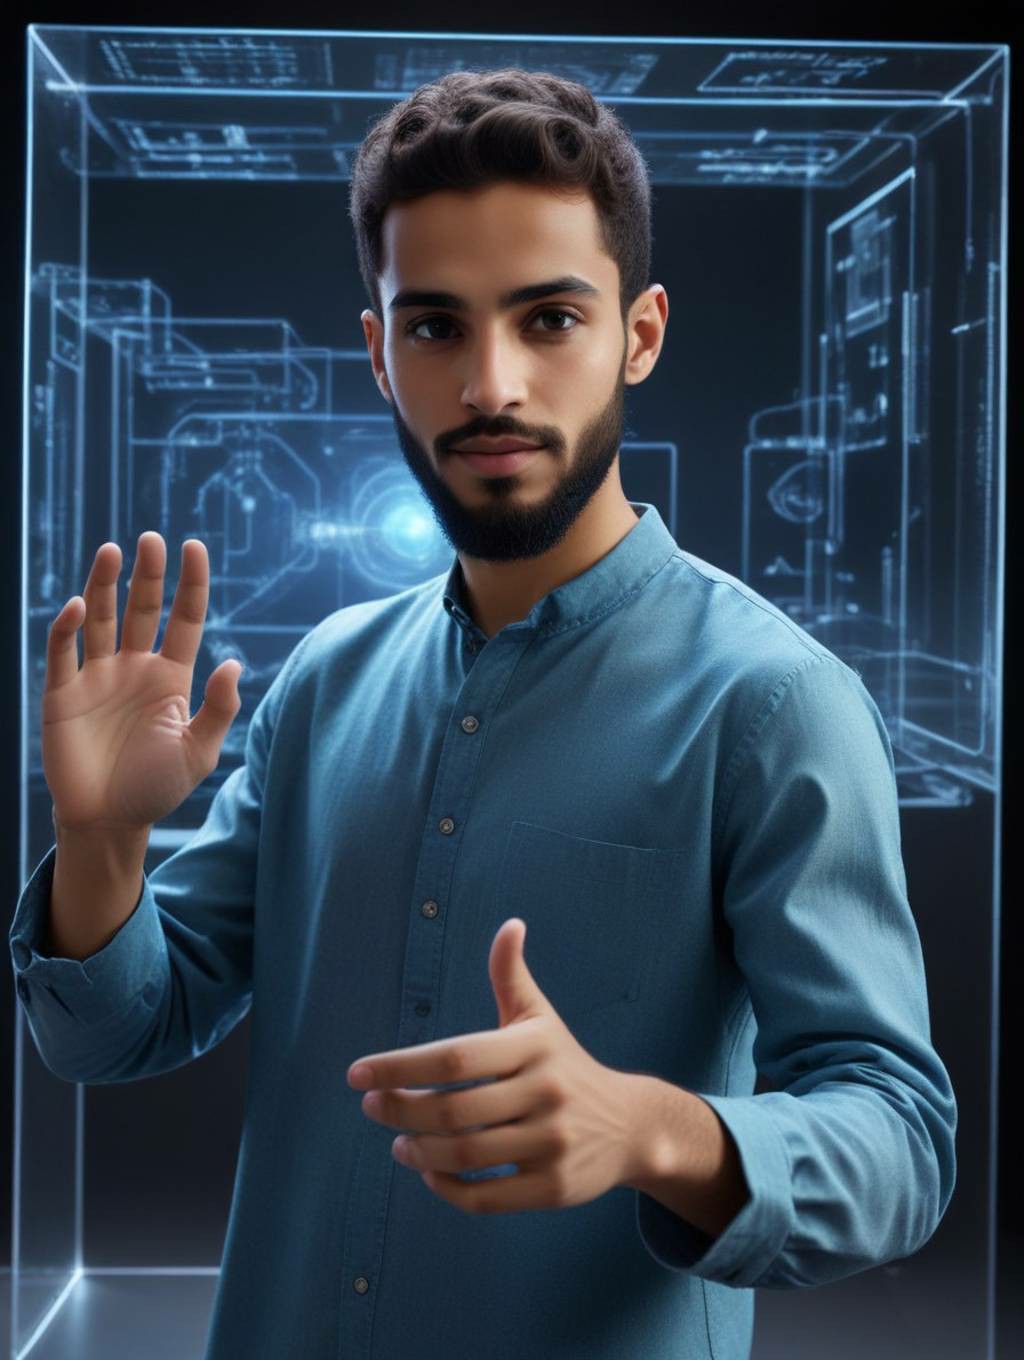 Holographic Interface Men: Wall Frames & Self-Portraits-Theme:6